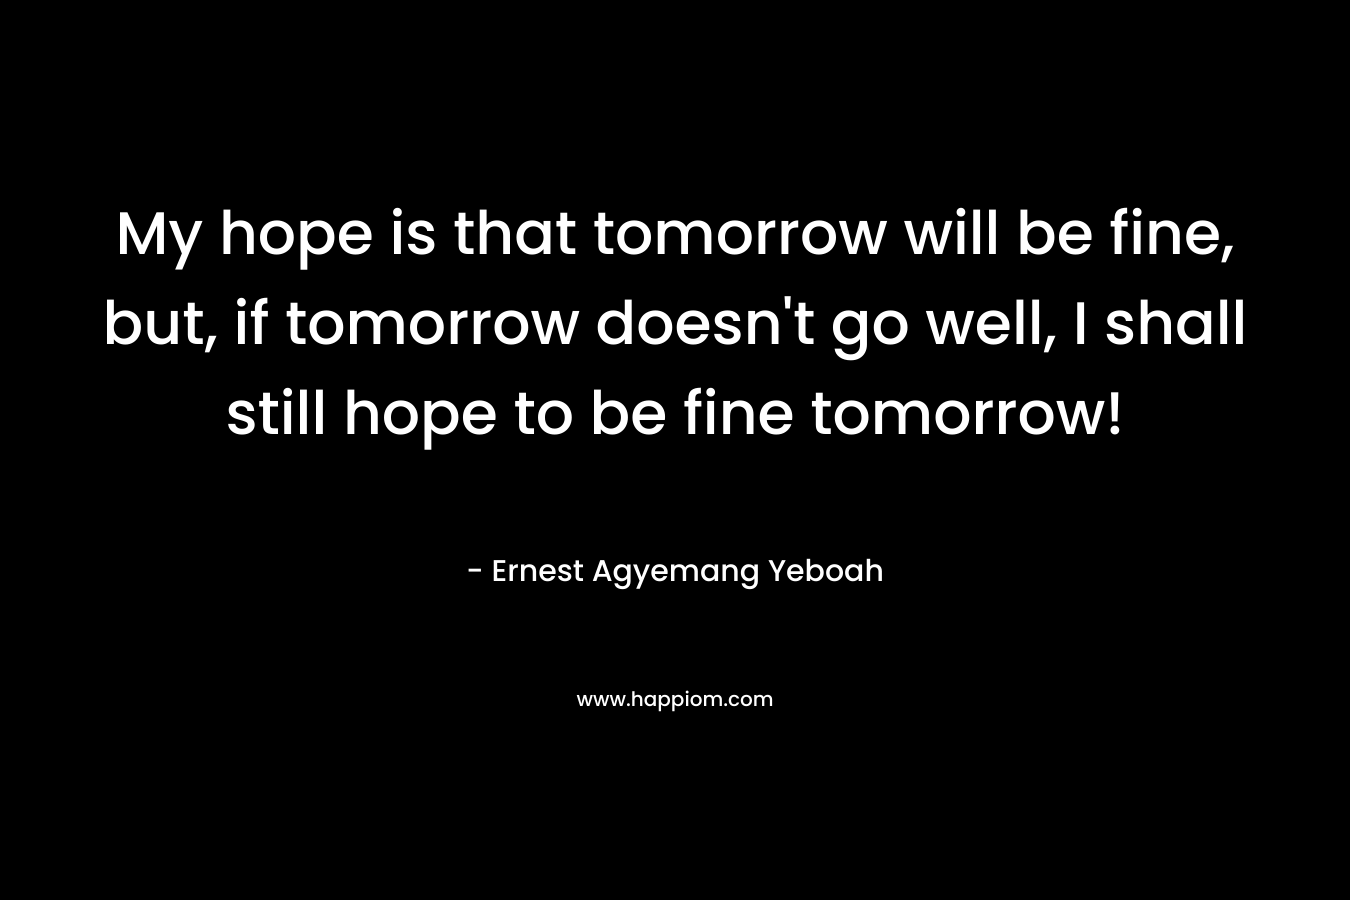 My hope is that tomorrow will be fine, but, if tomorrow doesn't go well, I shall still hope to be fine tomorrow!